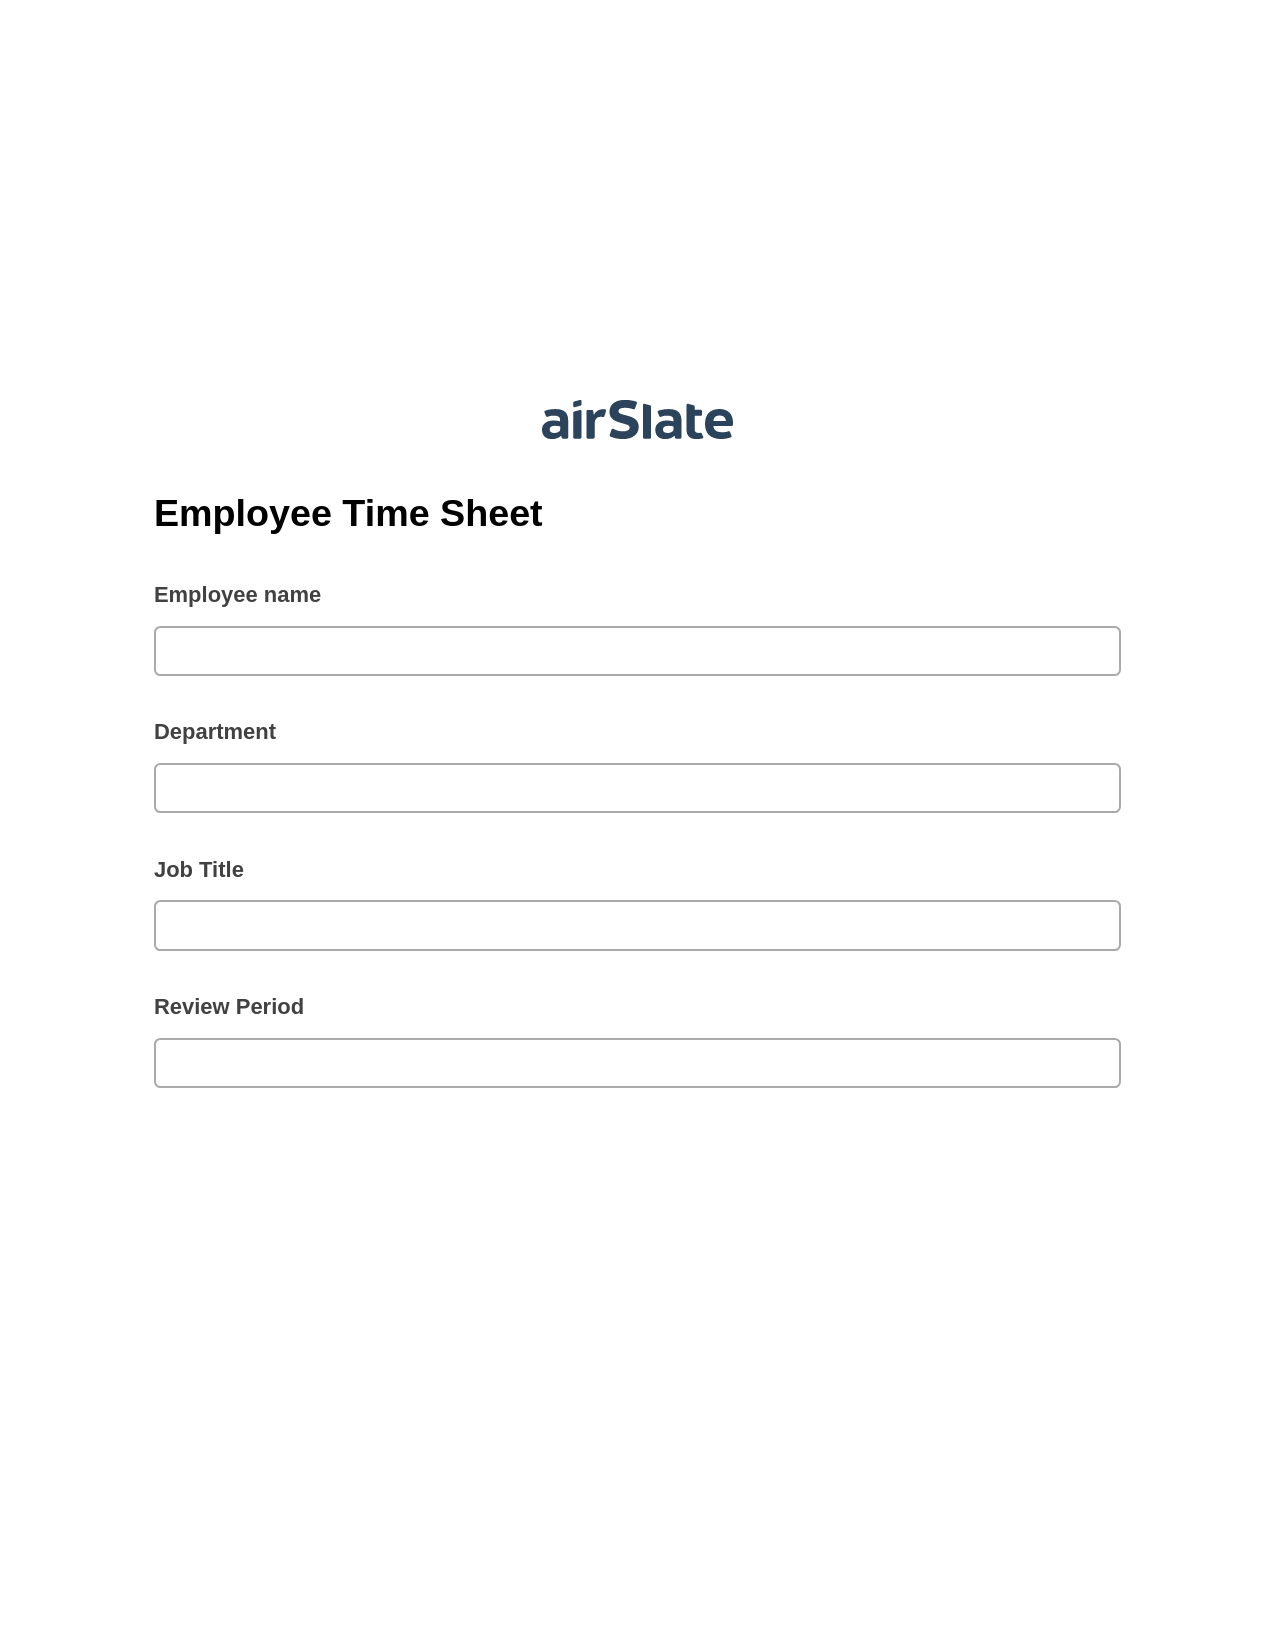 Employee Time Sheet Pre-fill from Office 365 Excel Bot, Create Salesforce Records Bot, Export to Excel 365 Bot